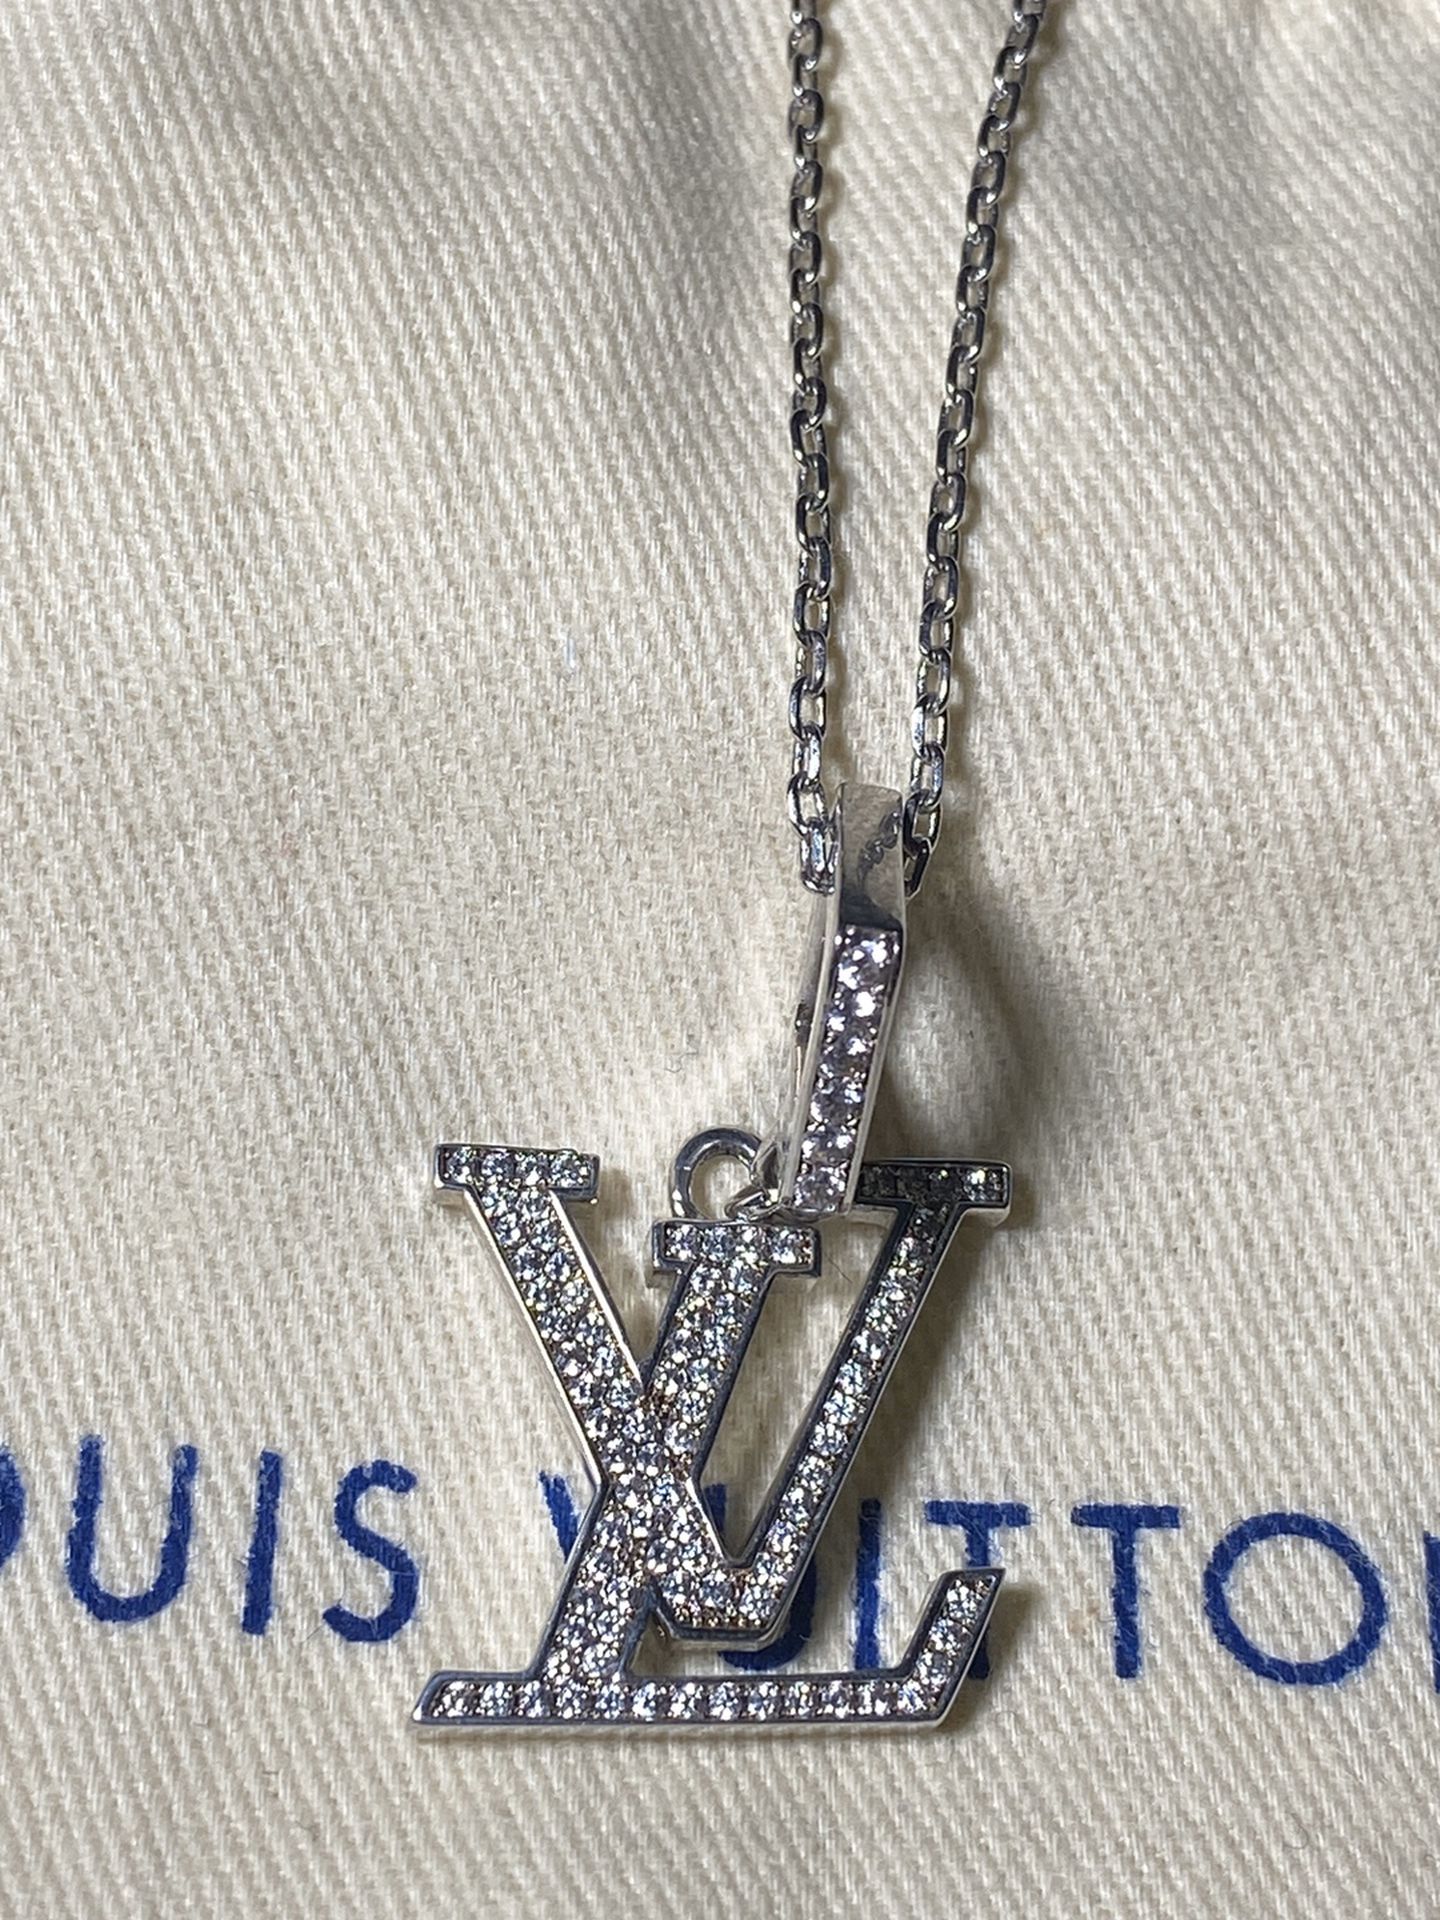 Louis Vuitton Necklace for Sale in New York, NY - OfferUp